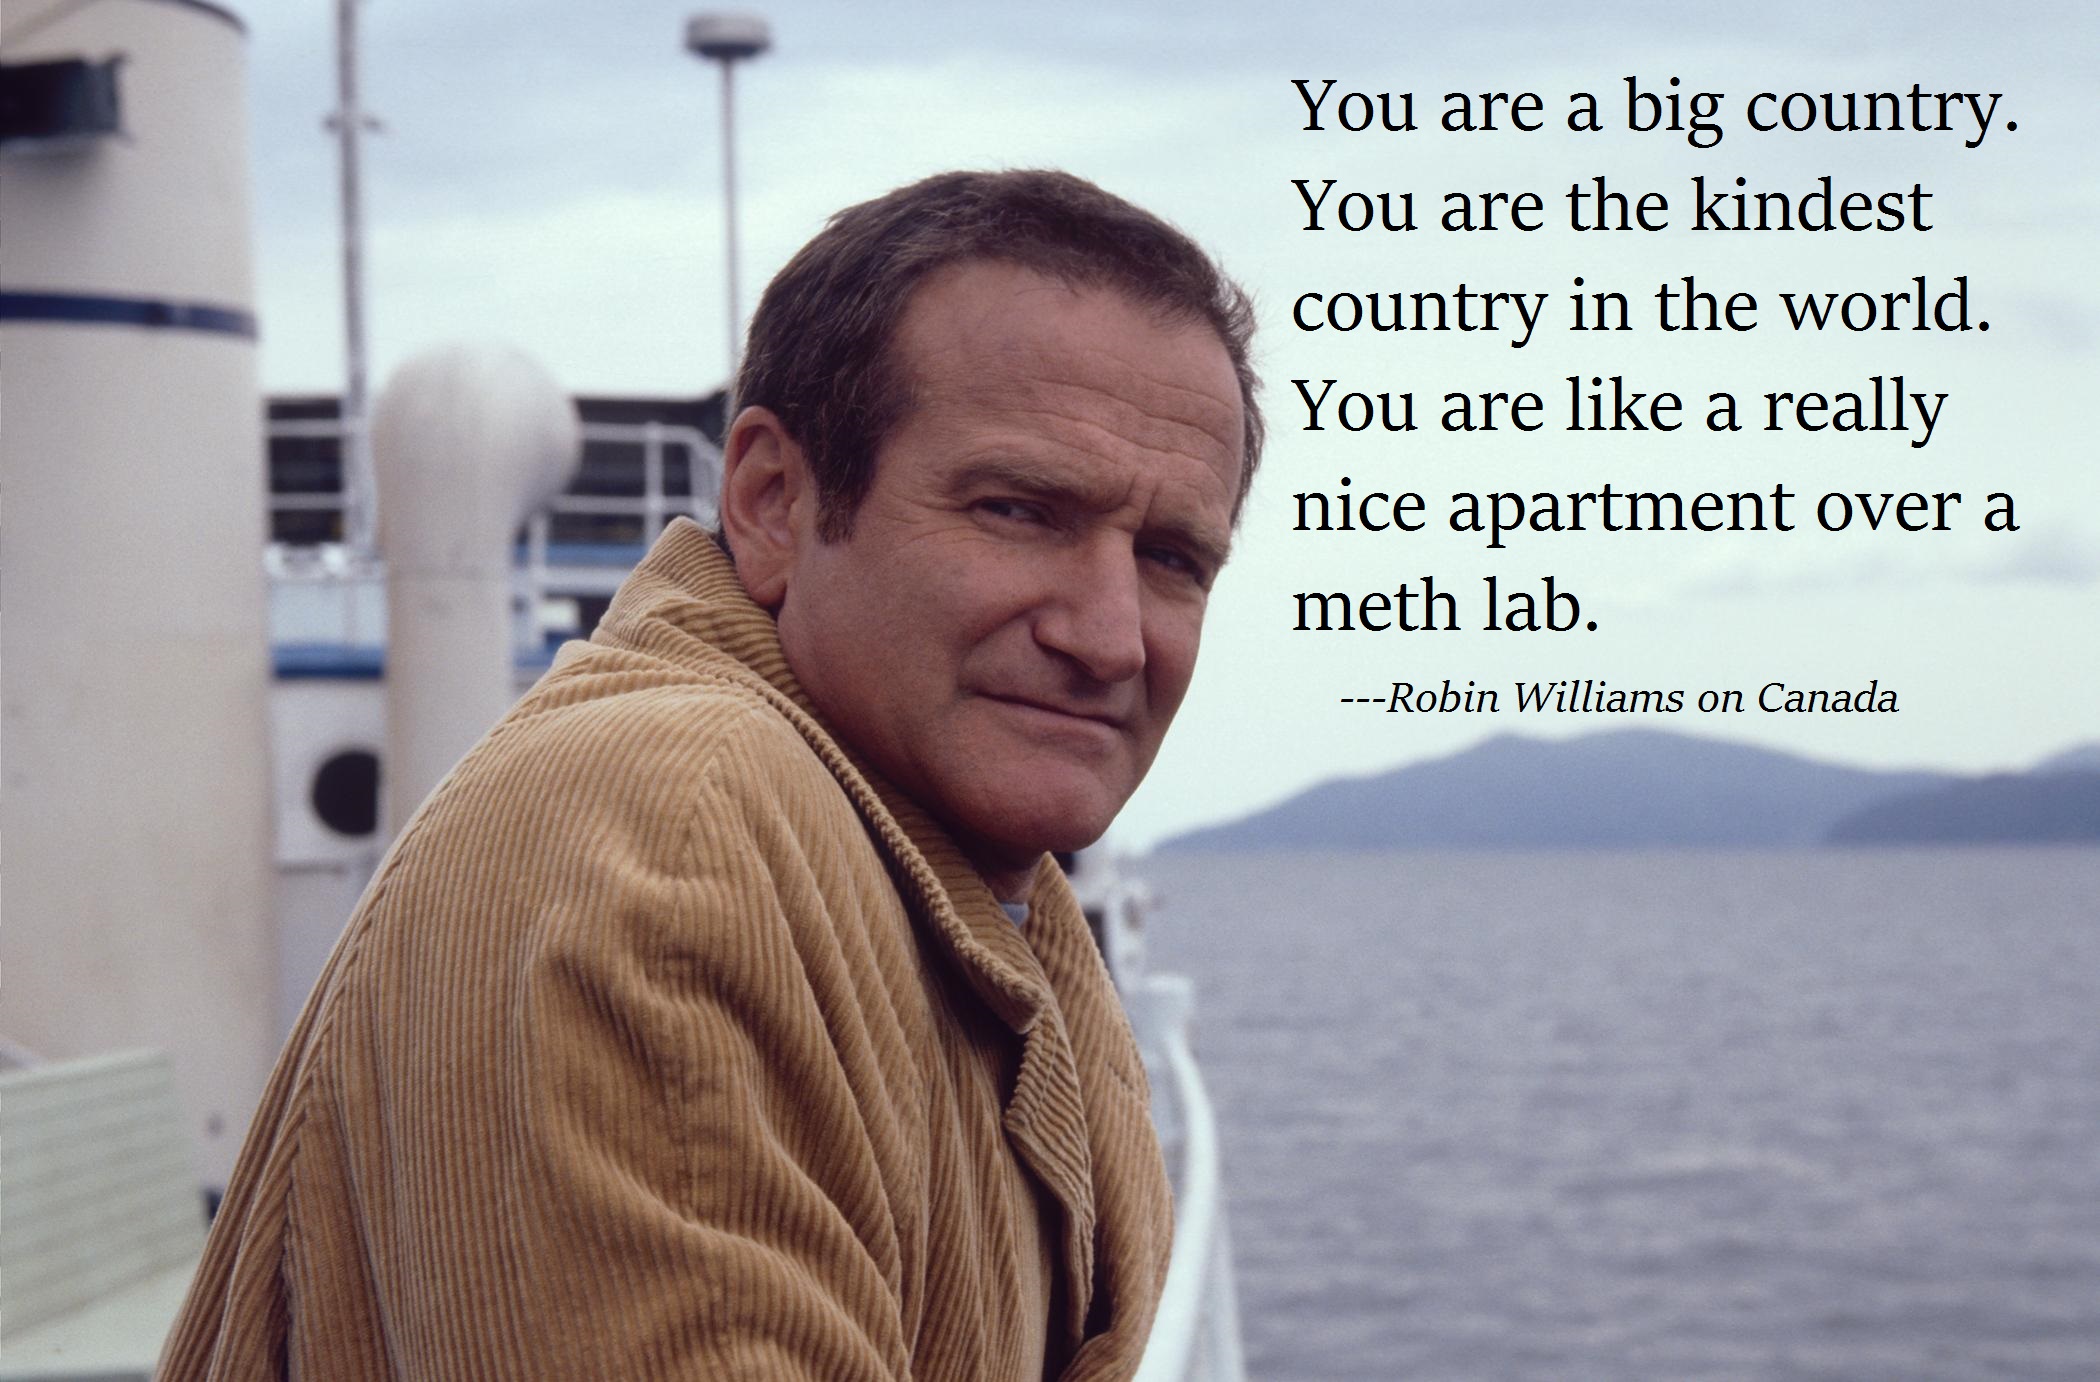 big country meme - You are a big country. You are the kindest country in the world. You are a really nice apartment over a meth lab. Robin Williams on Canada